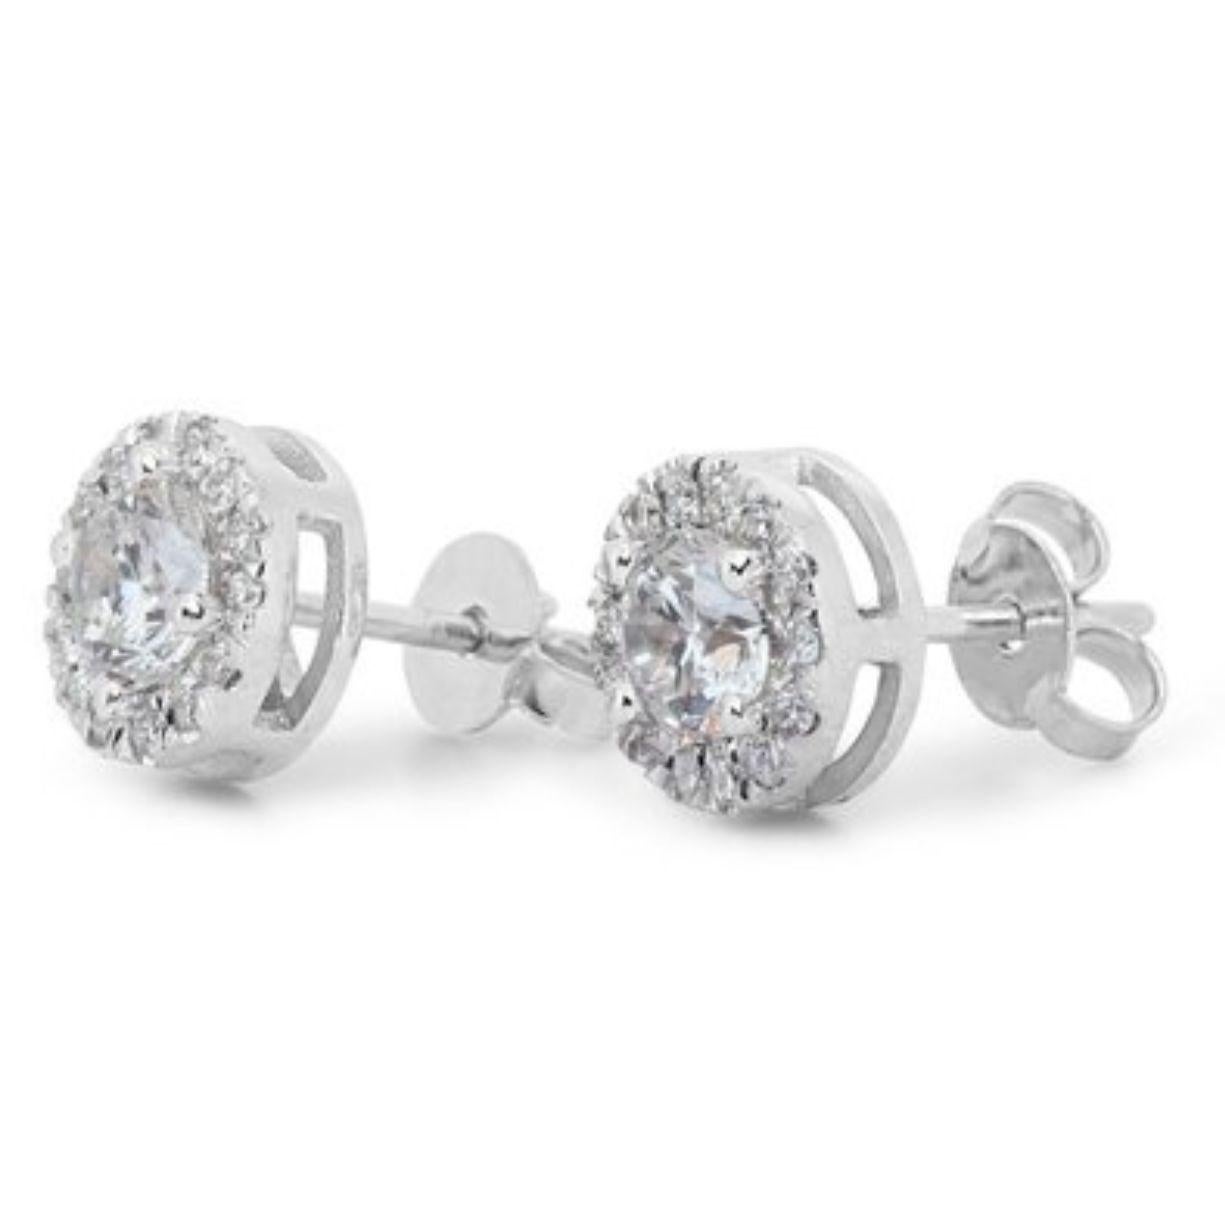 Exquisite 1.14 Carat D Color VVS1 Diamond Halo Earrings in 18K White Gold In New Condition For Sale In רמת גן, IL